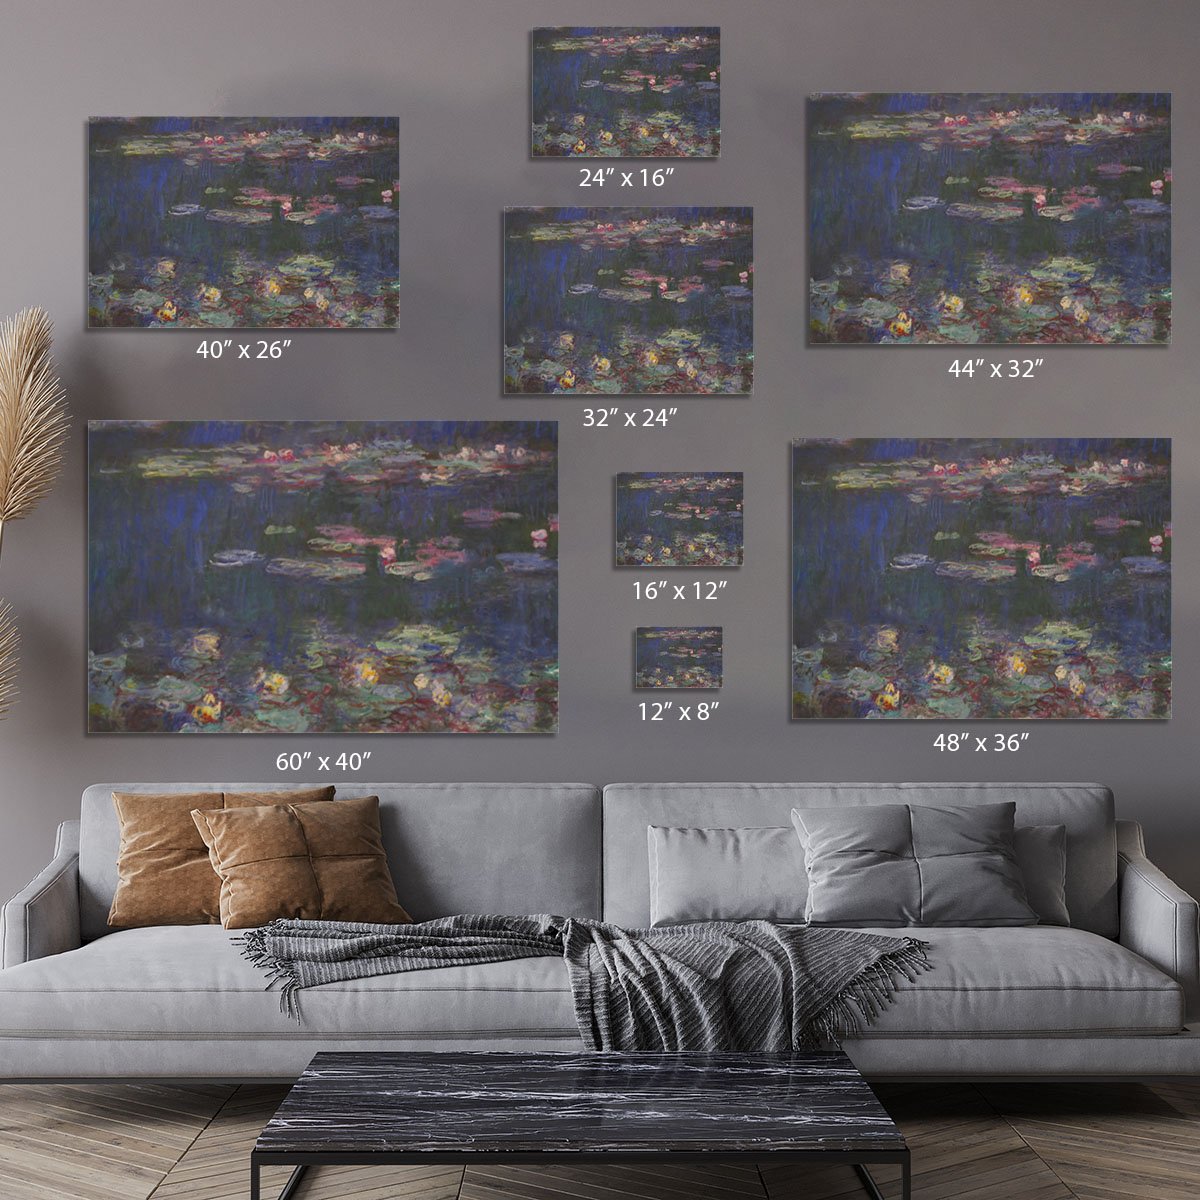 Water Lillies 11 by Monet Canvas Print or Poster